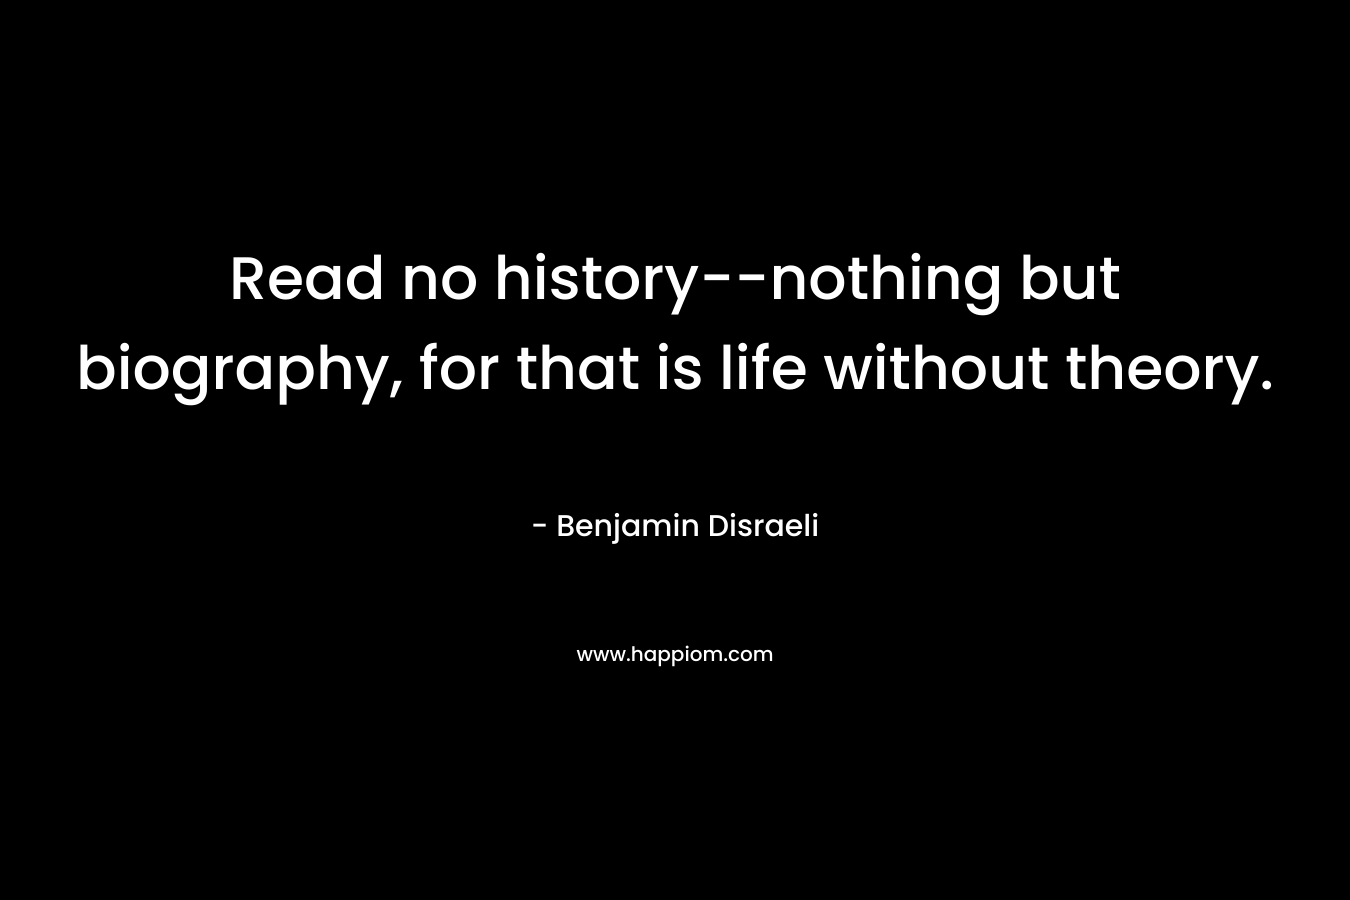 Read no history--nothing but biography, for that is life without theory.